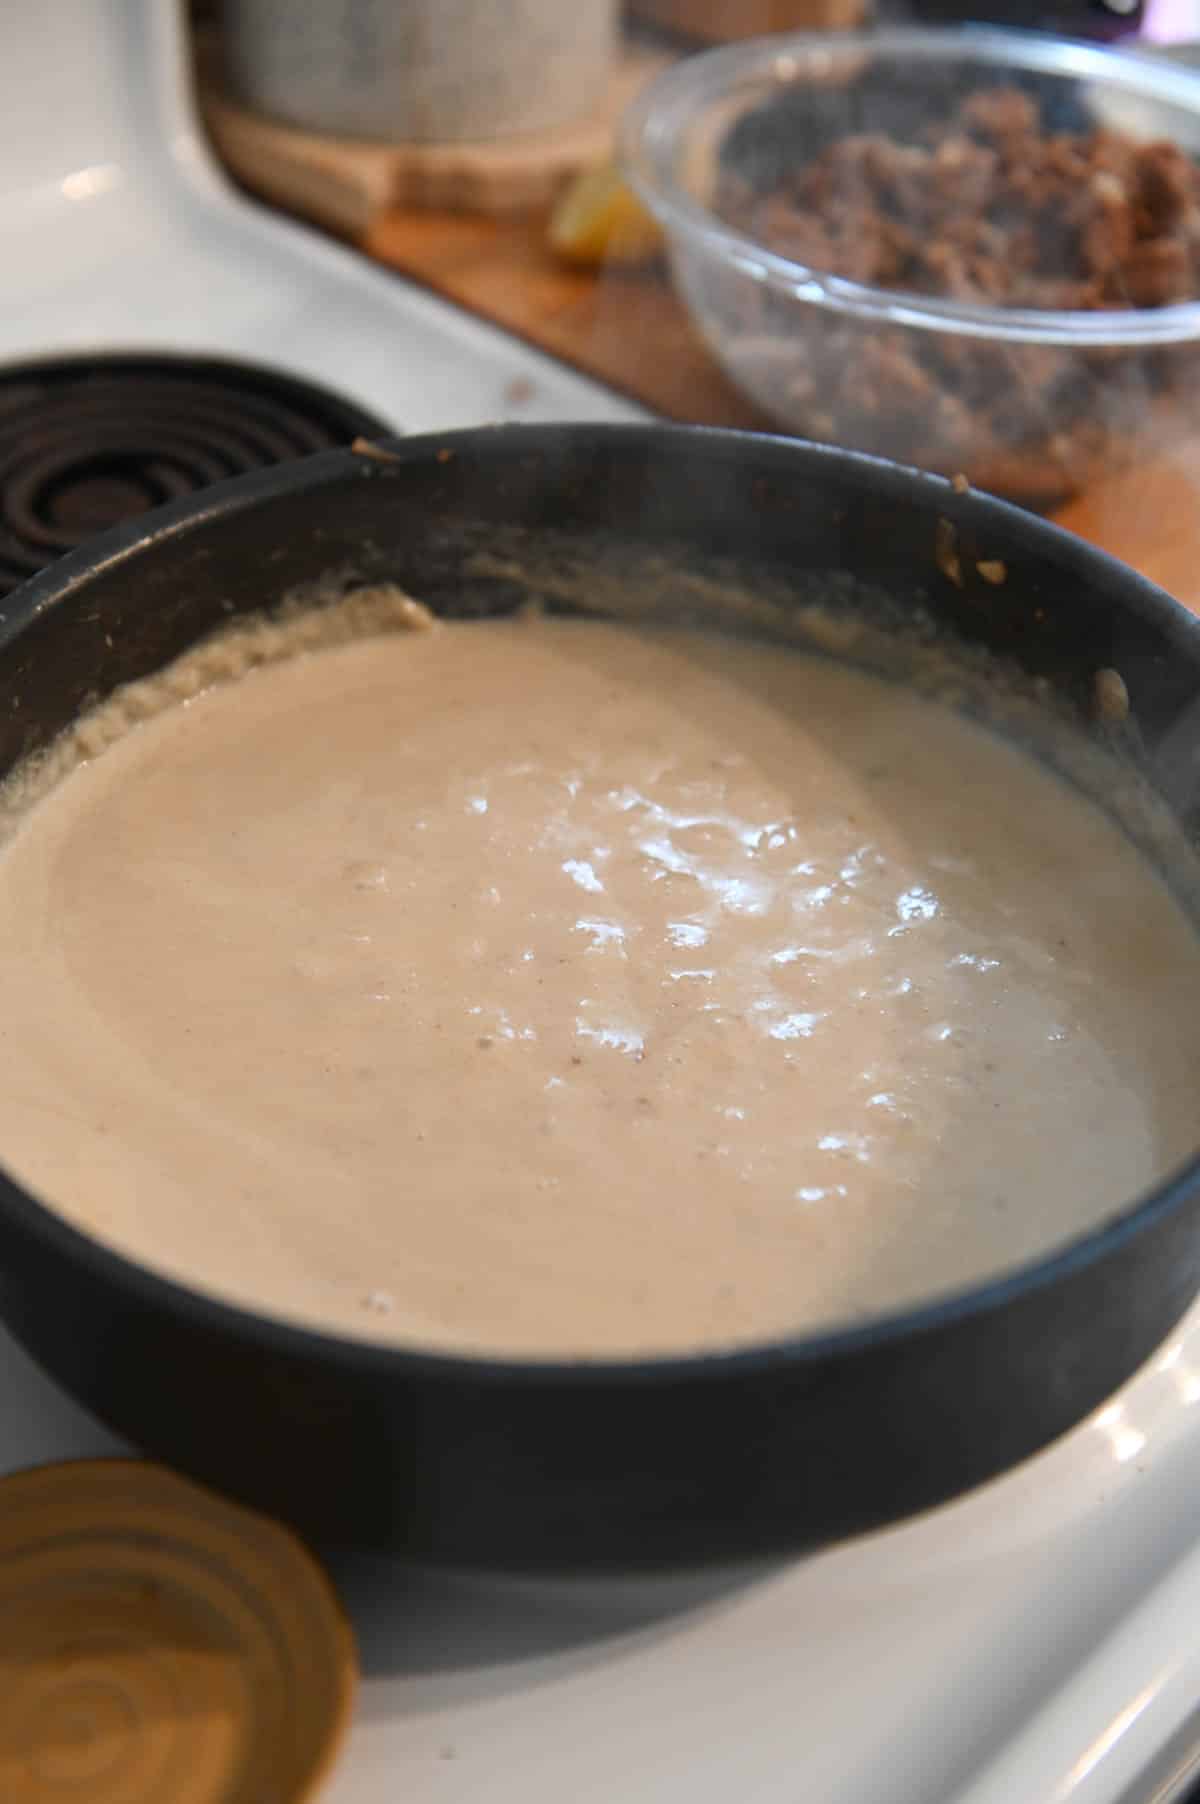 Bubbling roux in a black skillet.